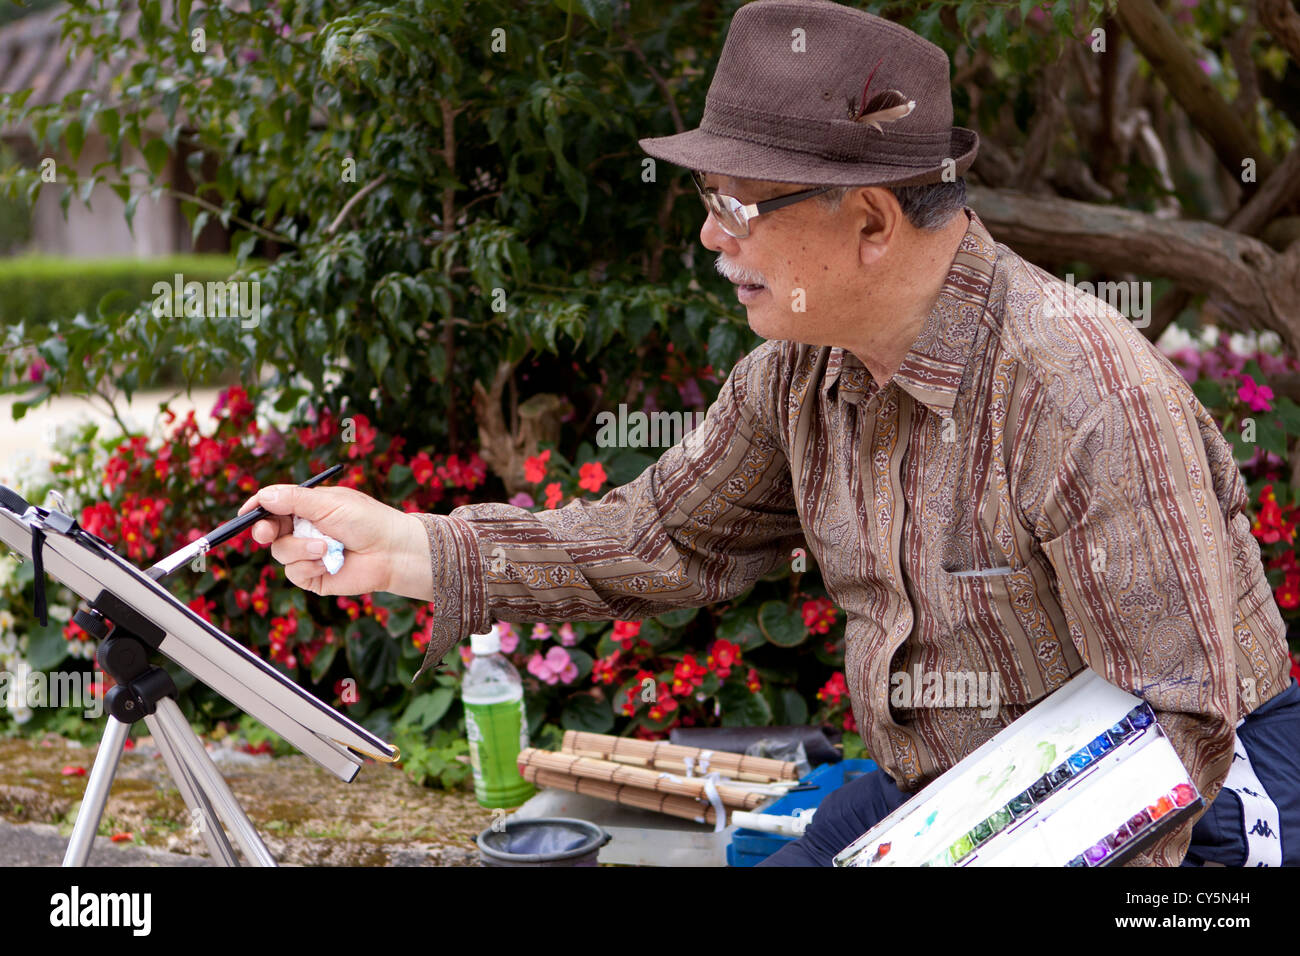 An elderly Okinawan man painting in the grounds of Ryukyu Mura - a theme park dedicated to celebrating ancient Okinawan culture. Stock Photo